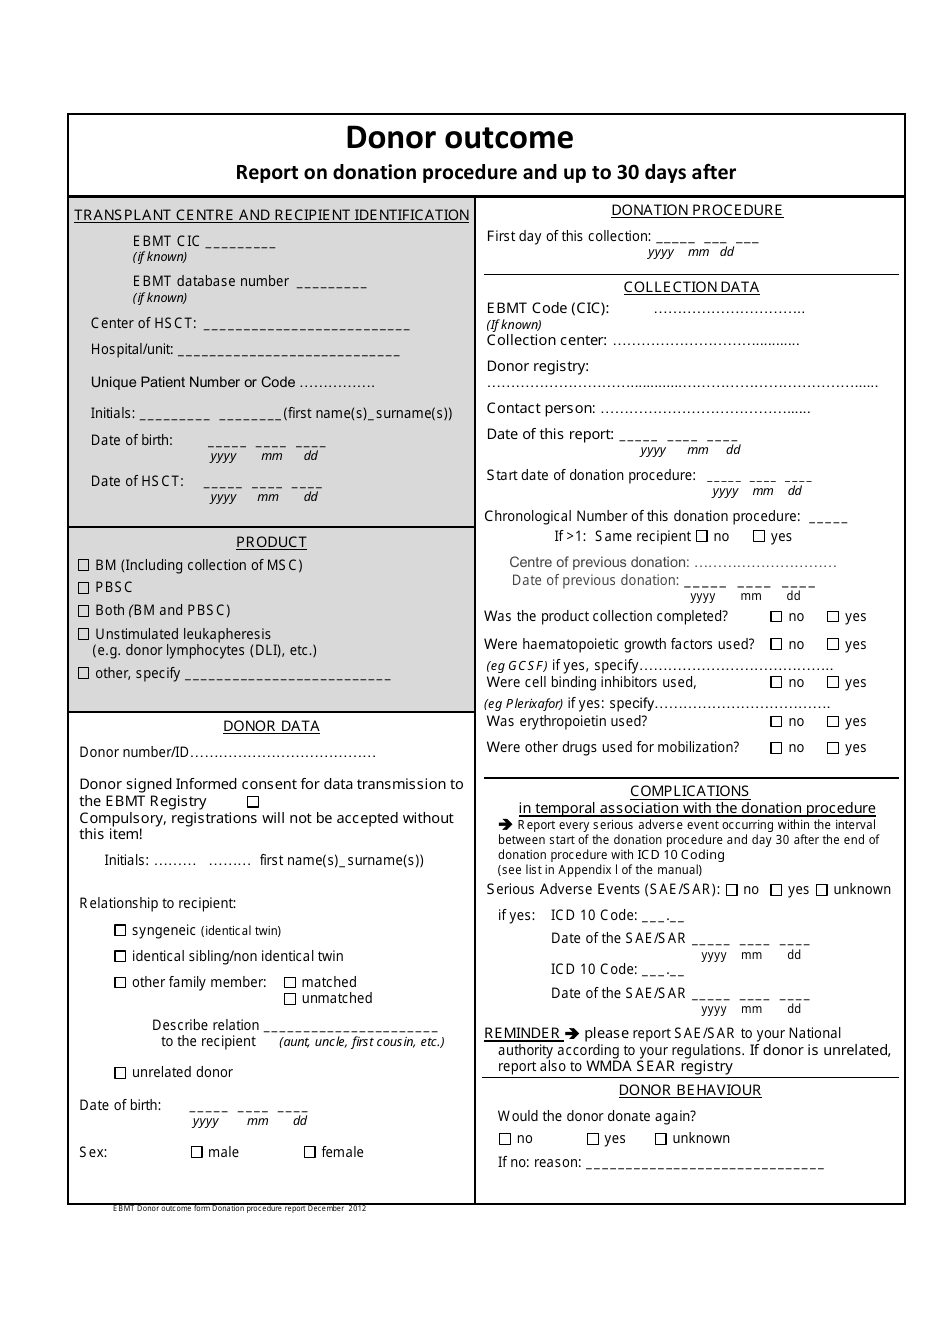 Stem Cells Donor Outcome Form - Report on Donation Procedure and up to 30 Days After - Hsct - Ebmt, Page 1